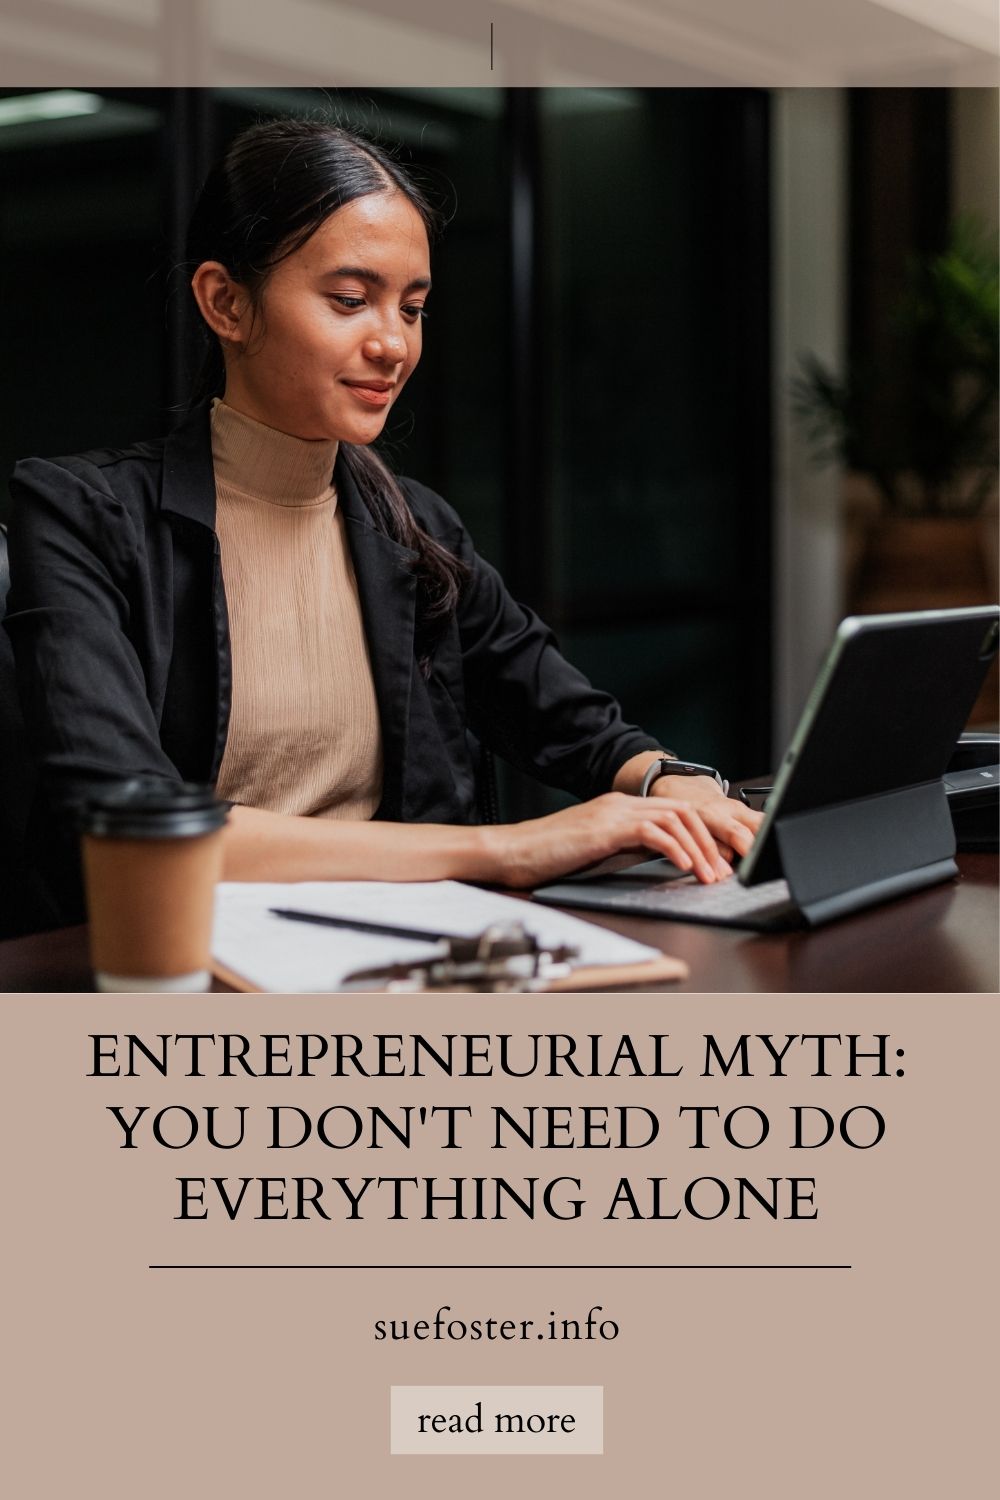 No matter your stage in entrepreneurship, there is no need to go it alone. Don't be deterred by this popular misconception that being successful requires all-out individual effort.